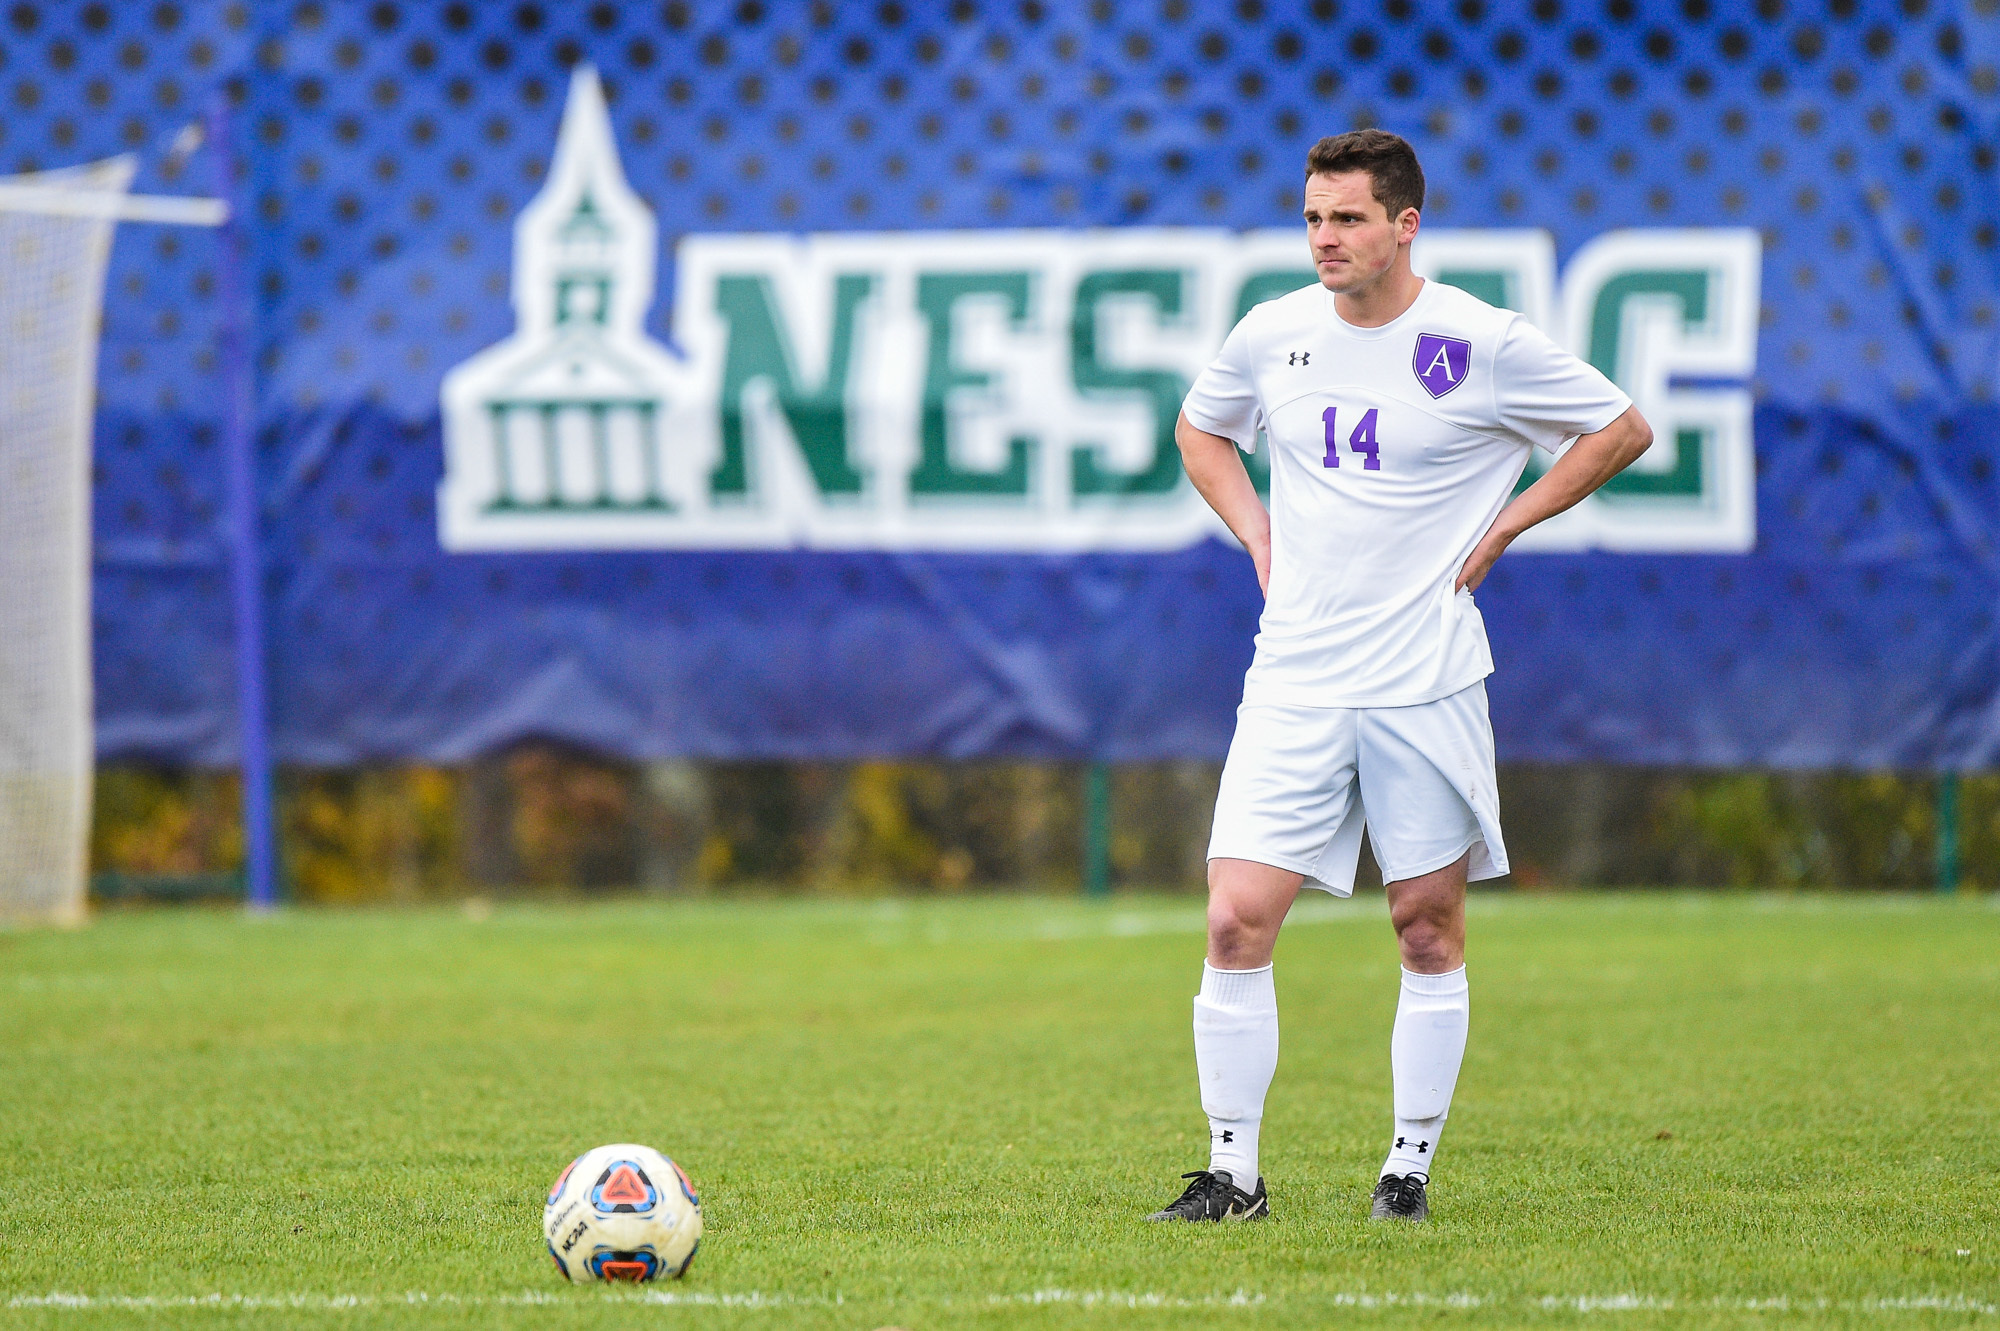 Jackson Lehnhart plays in the New England Small College Athletic Conference Men’s Soccer Championship between Hamilton College and Amherst College Nov. 6, 2016 in Amherst, Massachusetts. (Courtesy Jackson Lehnhart)